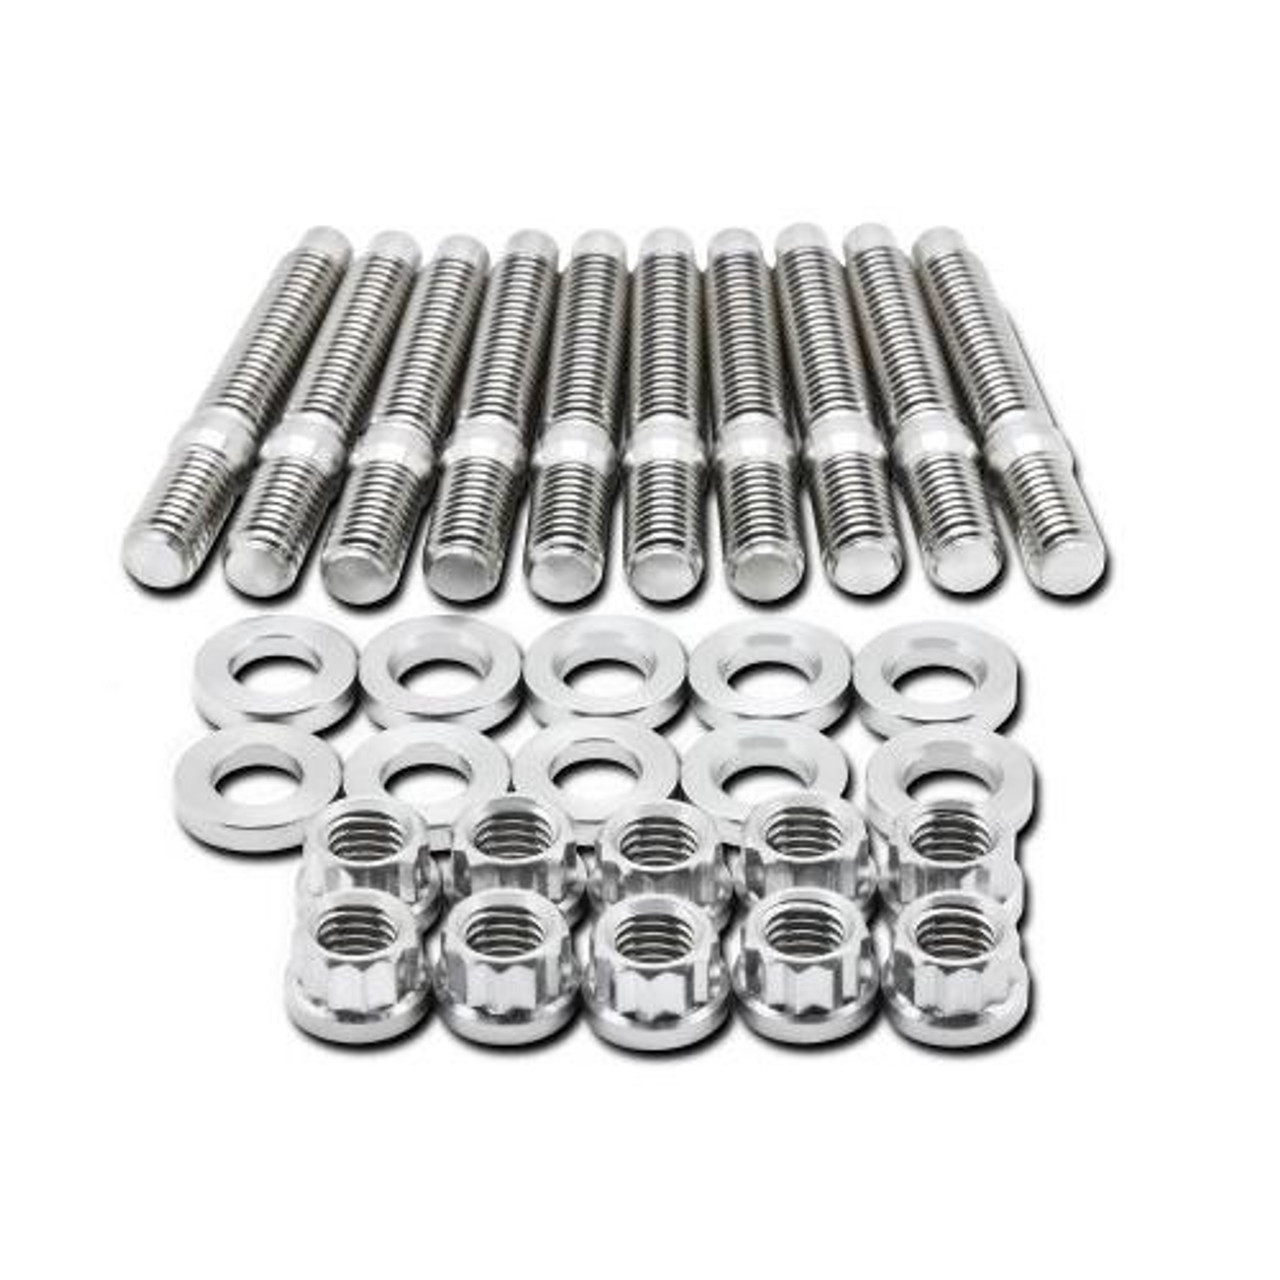 BLOX Racing SUS303 Stainless Steel Exhaust Manifold Stud Kit M8 x 1.25mm 45mm in Length - 7-piece